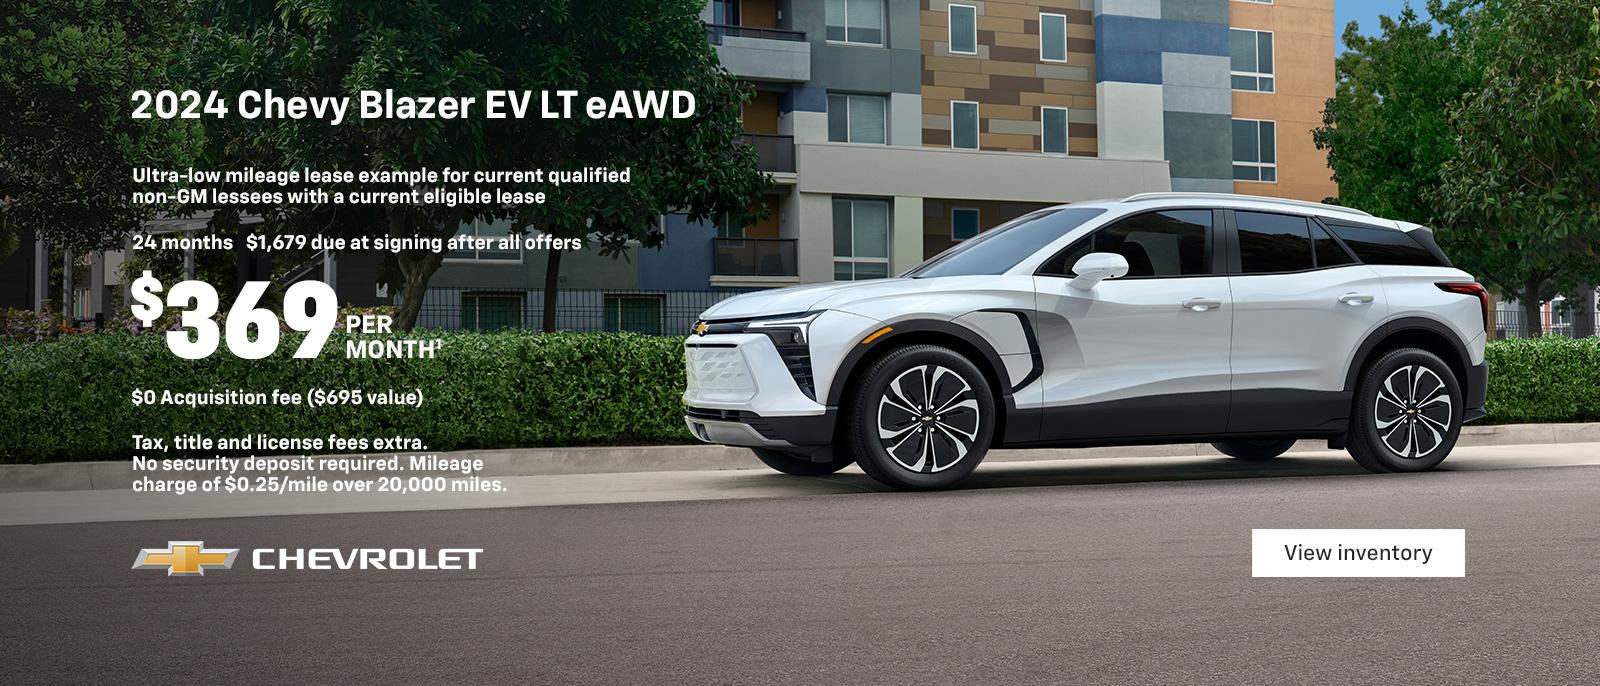 2024 Chevy Blazer EV LT. 2024 MotorTend SUV of the Year. The first-ever, all-electric Blazer EV. Ultra-low mileage lease example for current qualified non-GM lessees with a current eligible lease. $369 per month. 24 months. $1,679 due at signing after all offers. $0 Acquisition fee ($695 value). Tax, title and license fees extra. No security deposit required. Mileage charge of $0.25/mile over 20,000 miles.